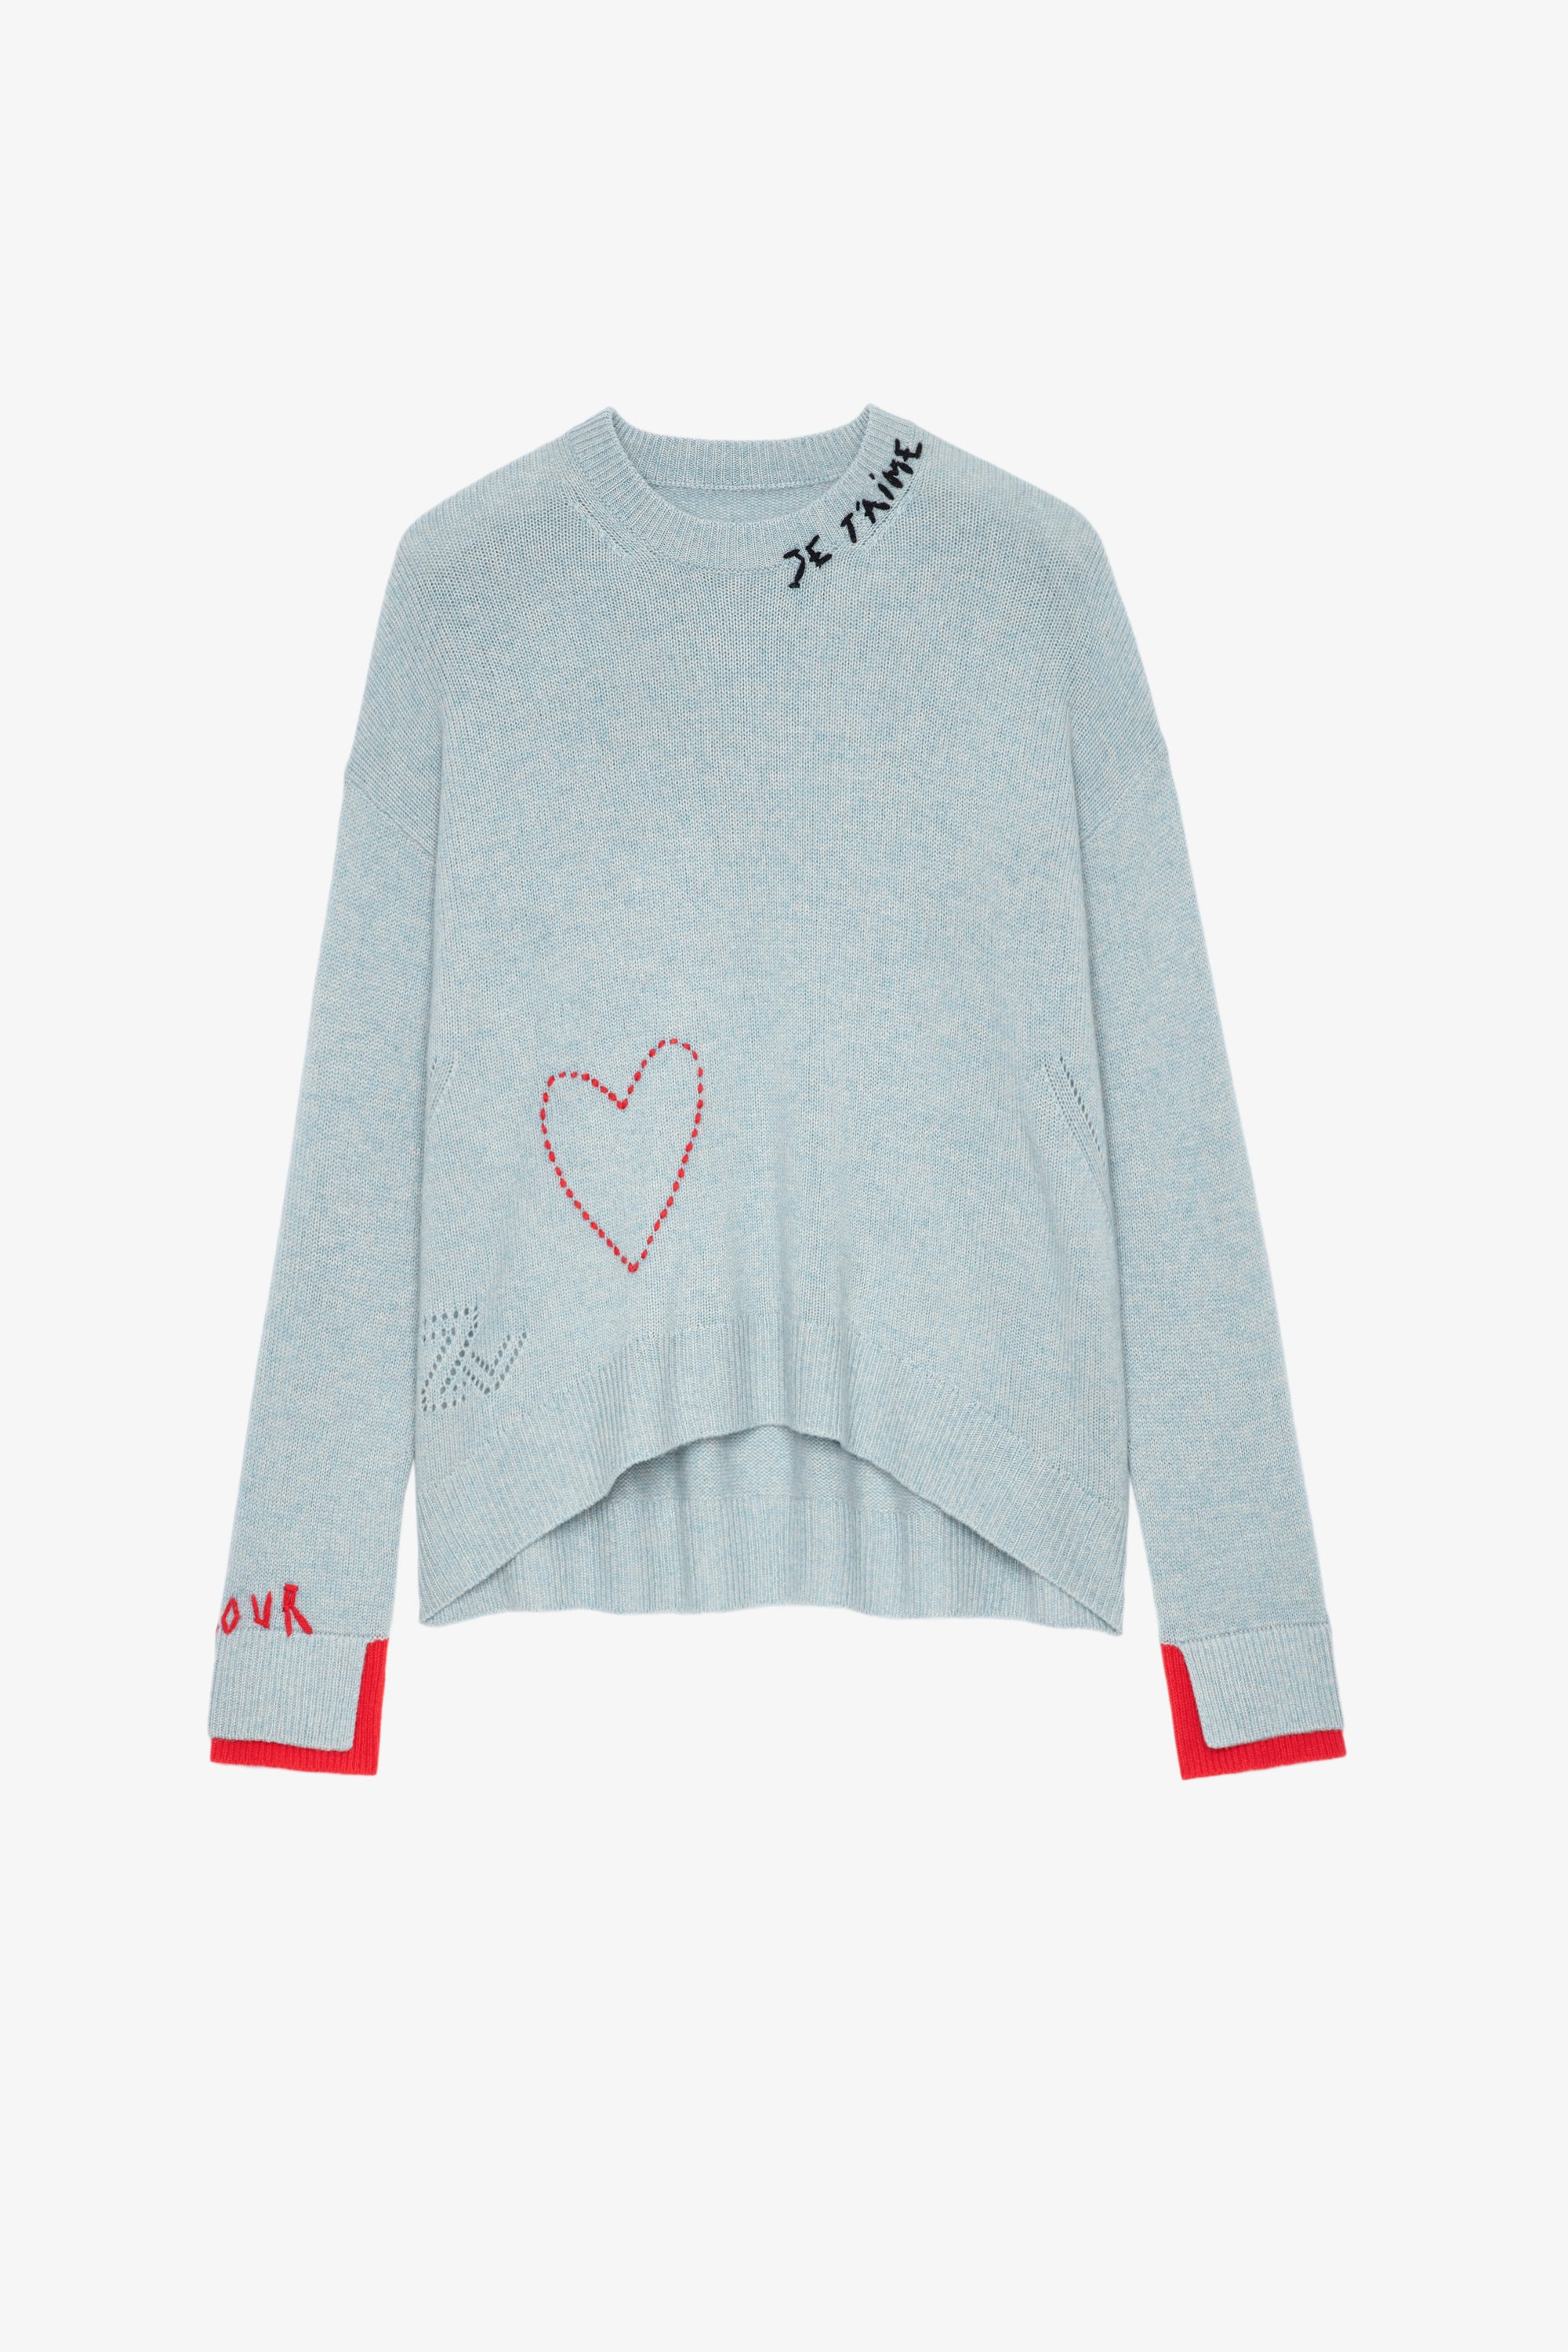 Markus Cashmere Jumper Women’s sky blue cashmere jumper with hearts and “Amour” and “Je t’aime” slogan embroidery